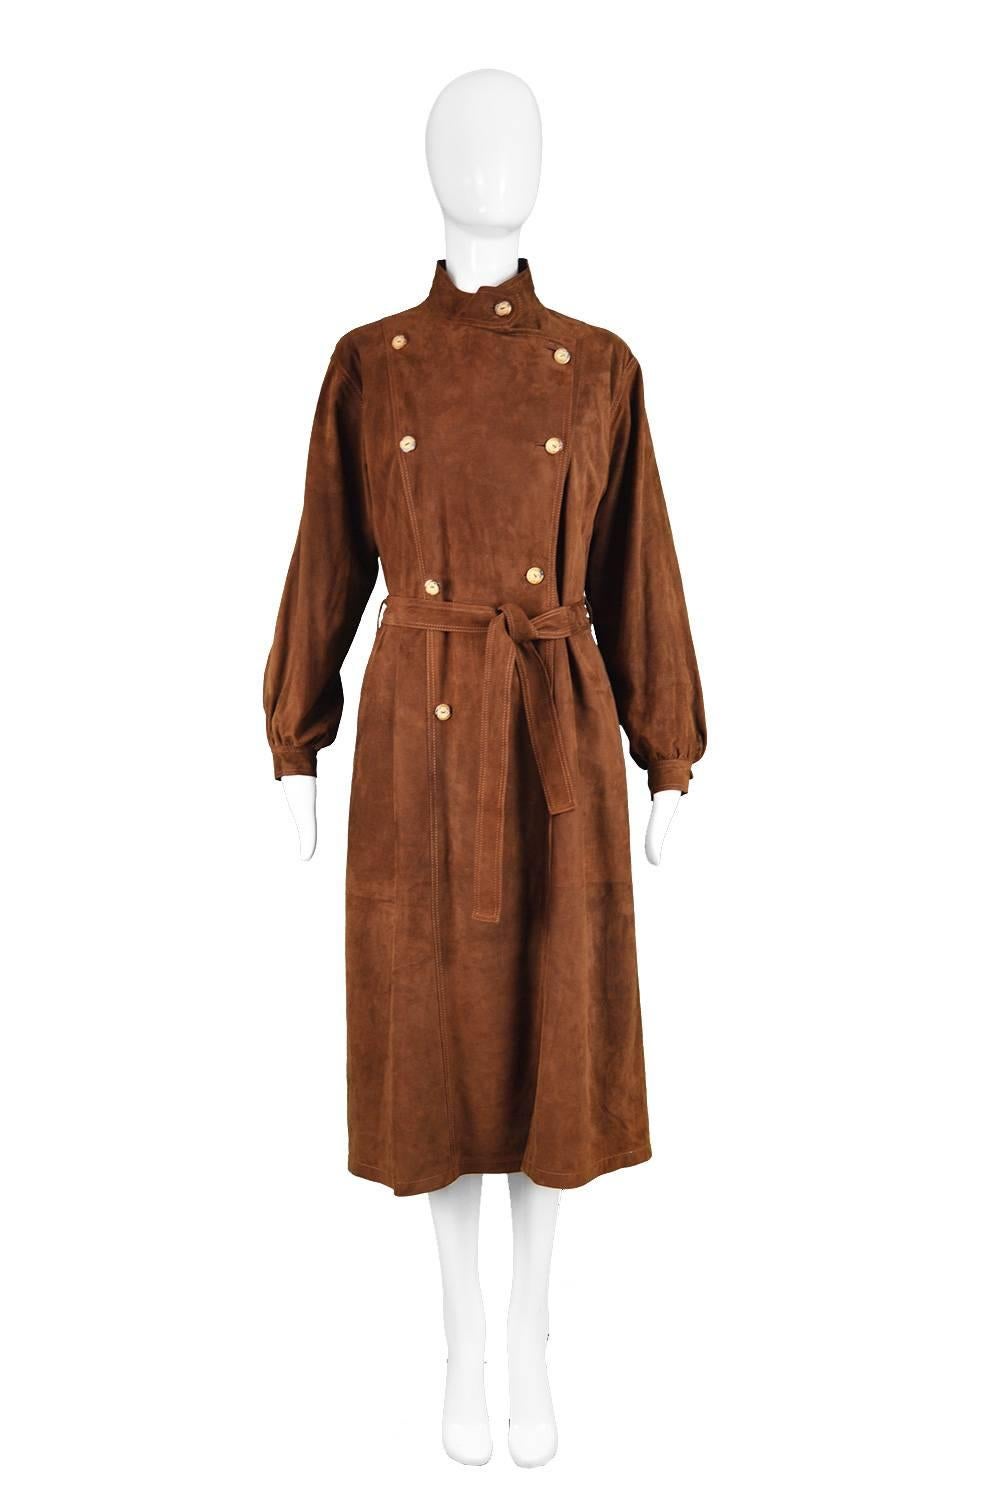 Loewe Vintage Brown Suede Double Breasted Shirtdress, 1980s

Estimated Size: UK 14/ US 10/ EU 42. Please check measurements. 
Bust - 38” / 96cm
Waist - 40” / 101cm (can be pulled in with belt
Hips - 42” / 106cm
Length (Shoulder to Hem) - 45” /